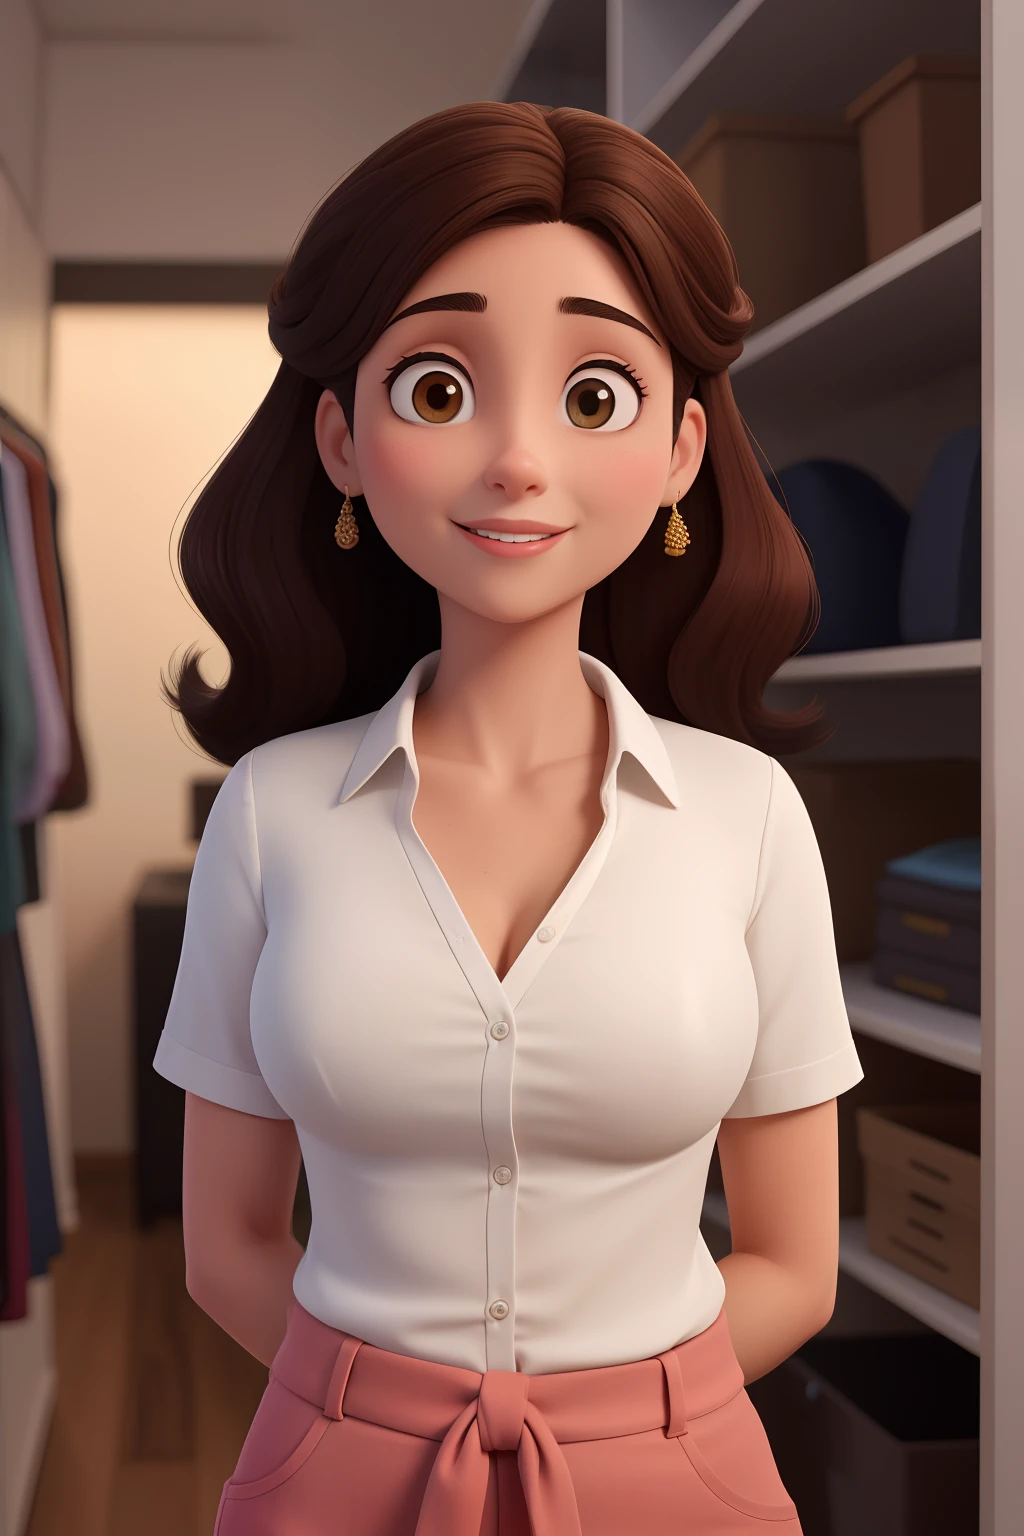 A Woman 30 years old, working in the closet dark brown hair, Round face, charmer smile, and brown, slightly slanted eyes, brunette skin, wearing a shirt and working.